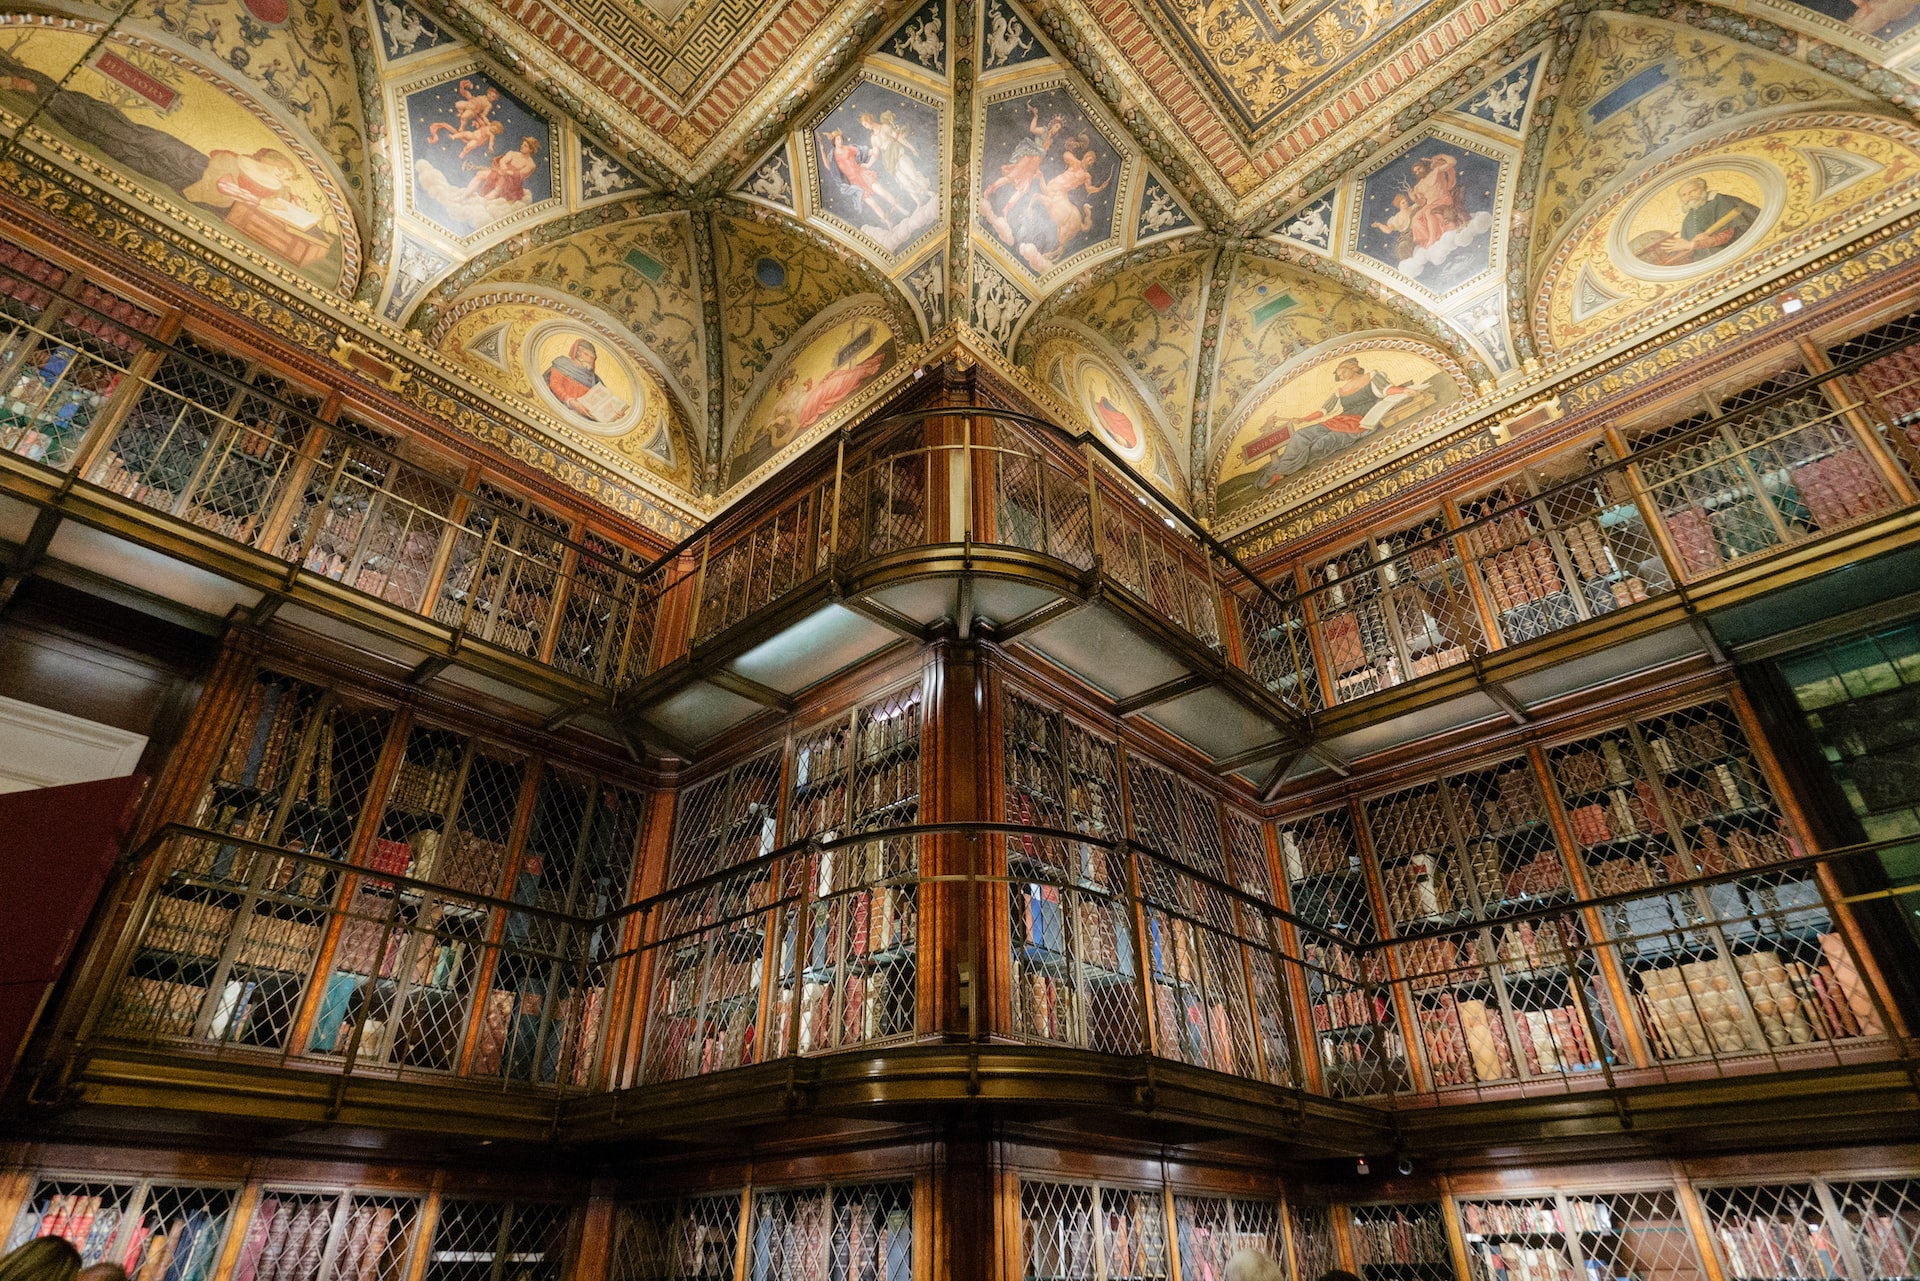 Books inside the Morgan Library and Museum in New York